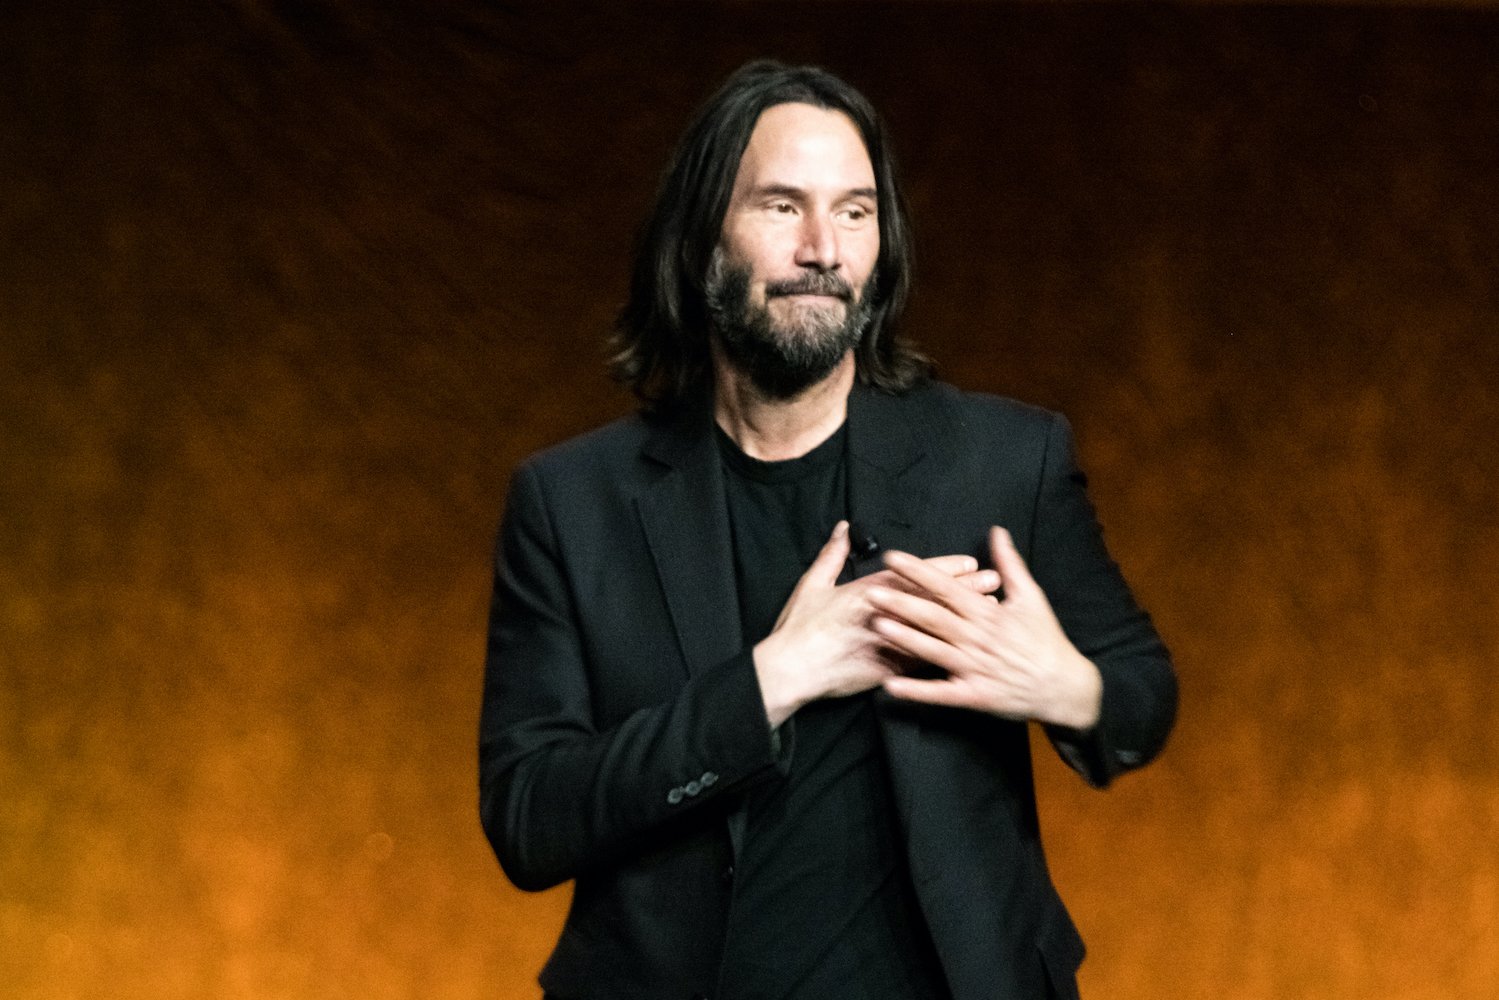 Keanu Reeves discusses the movie John Wick: Chapter 4 at CinemaCon 2022